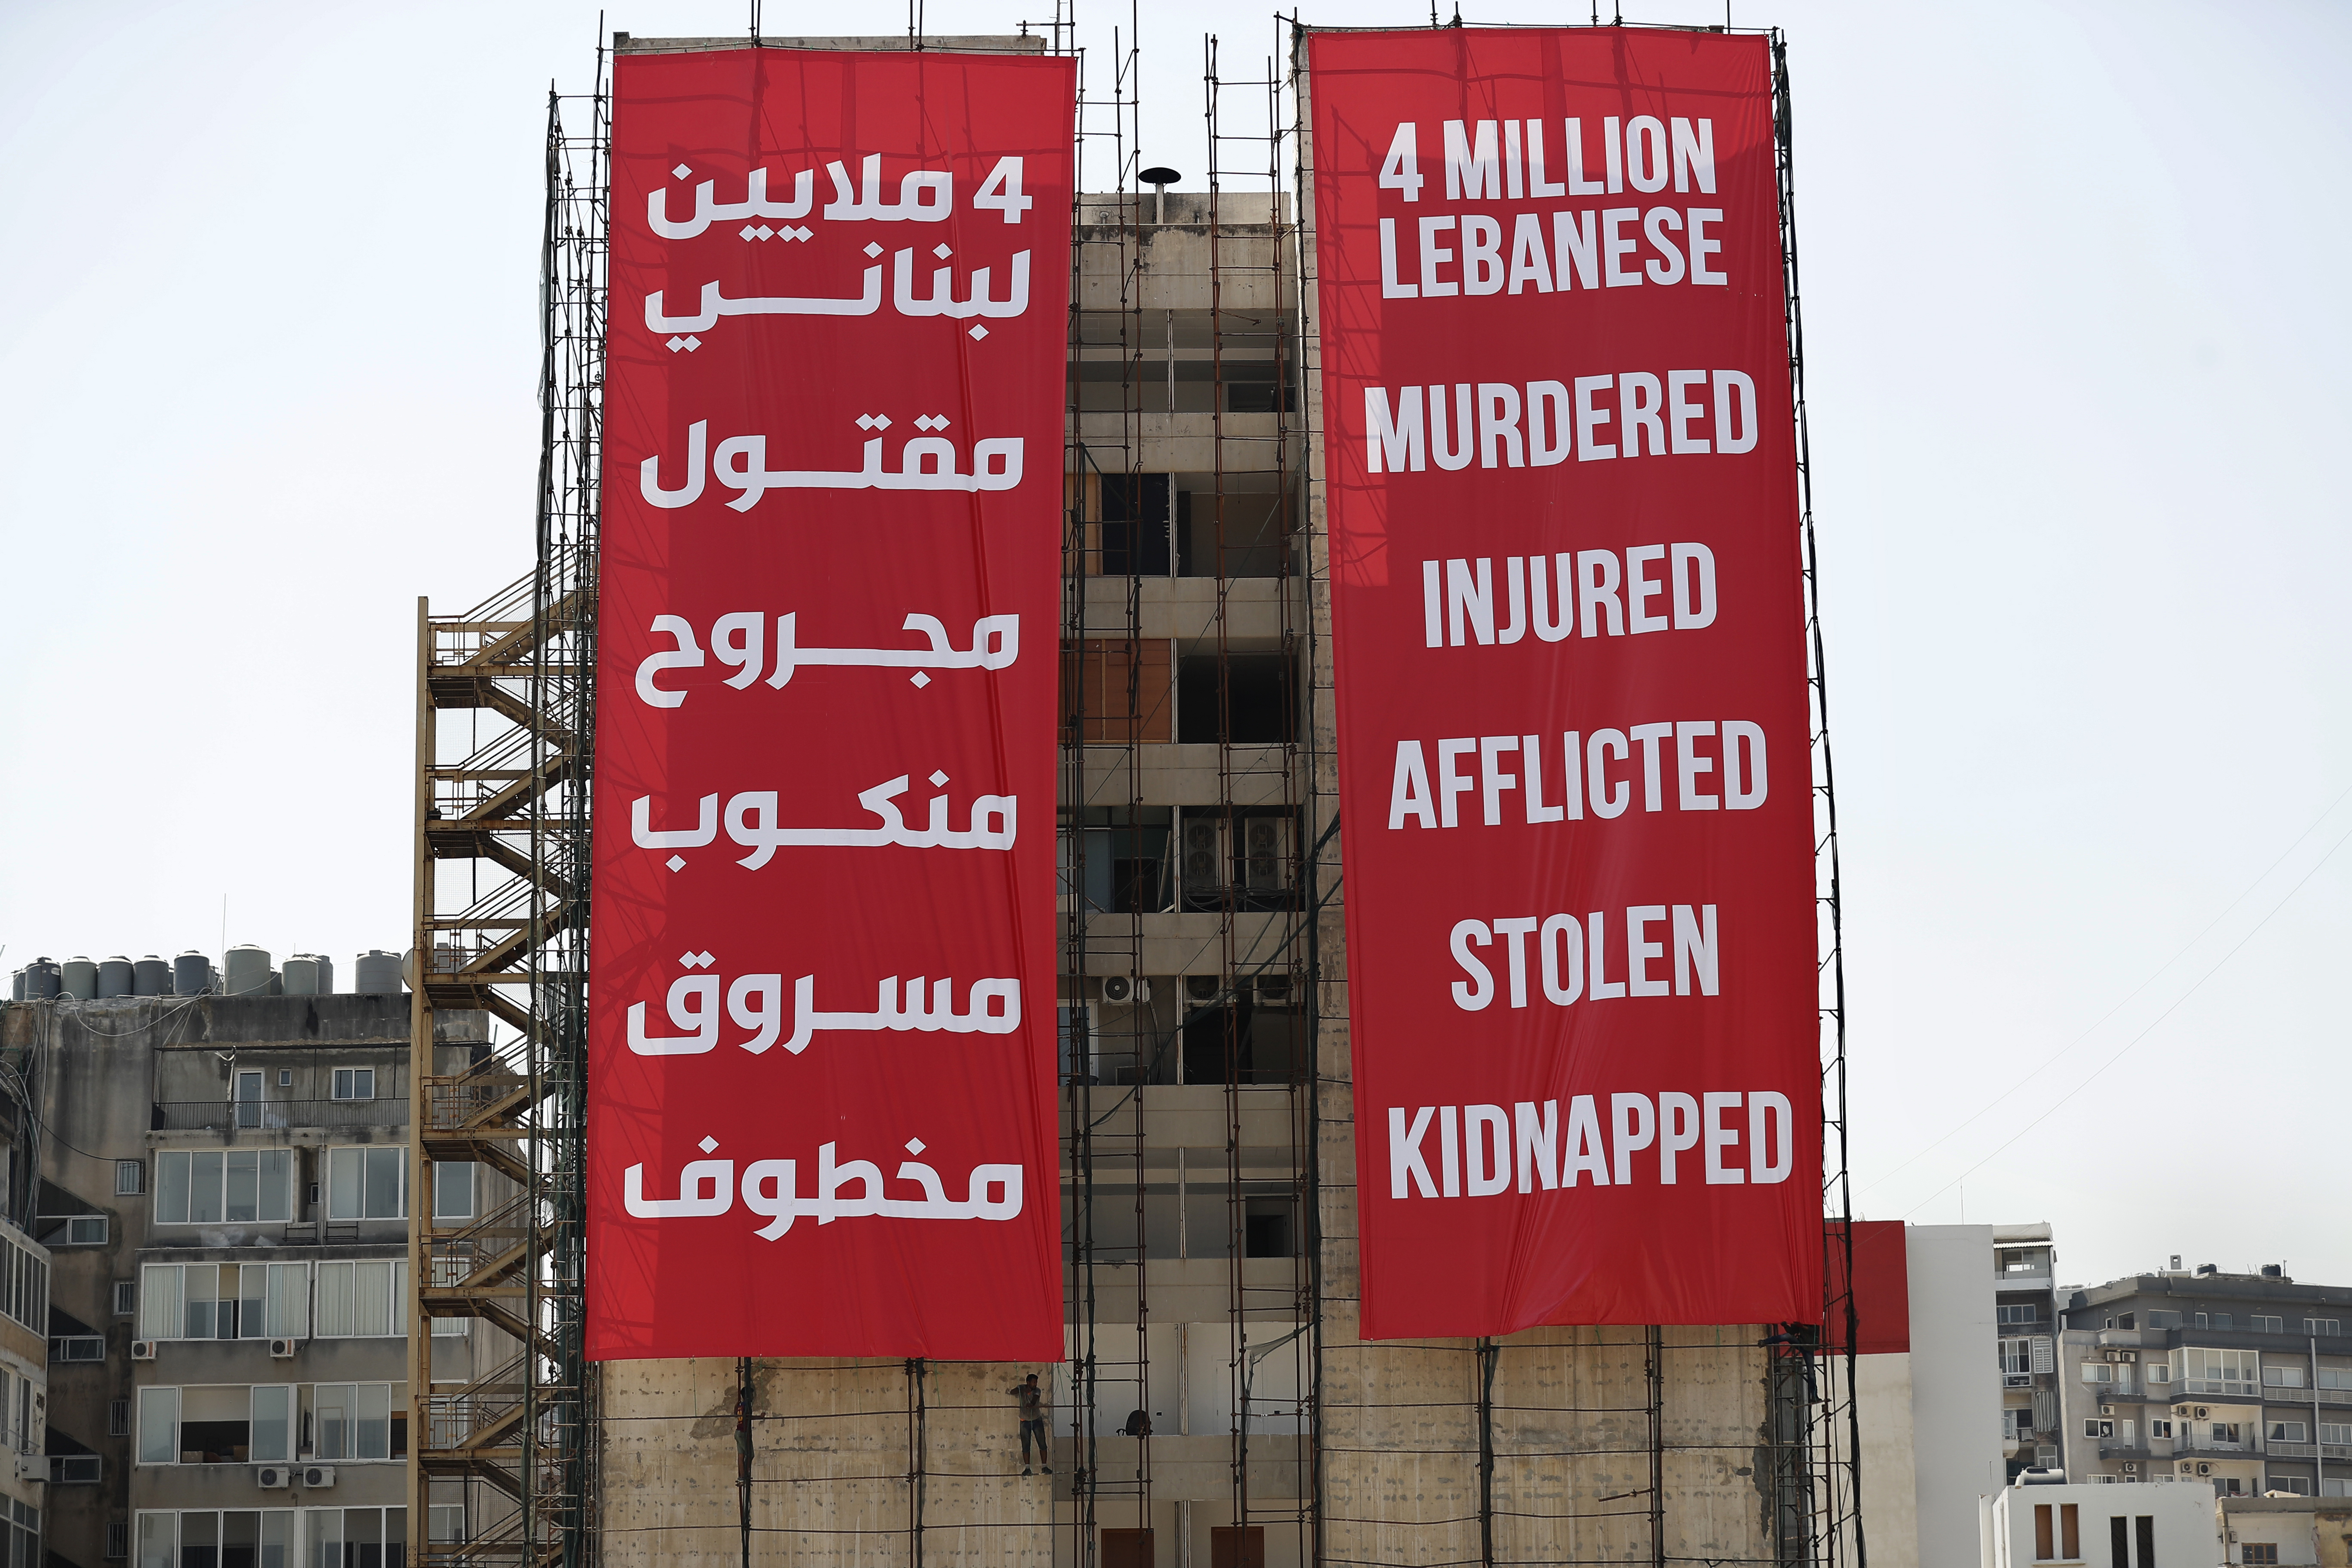 Giant posters on a building in Beirut